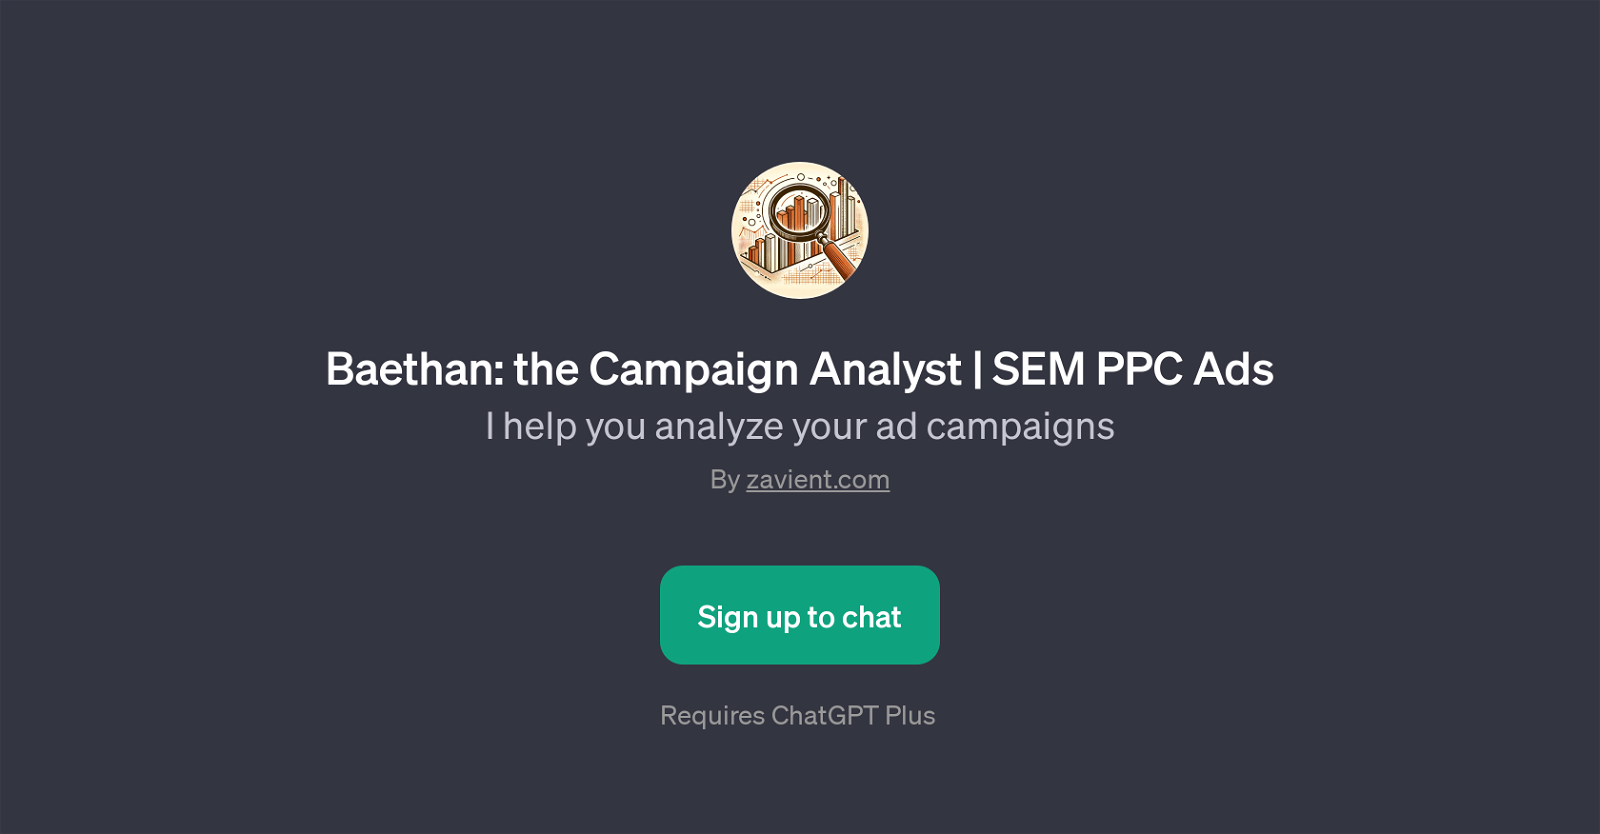 Baethan: the Campaign Analyst website